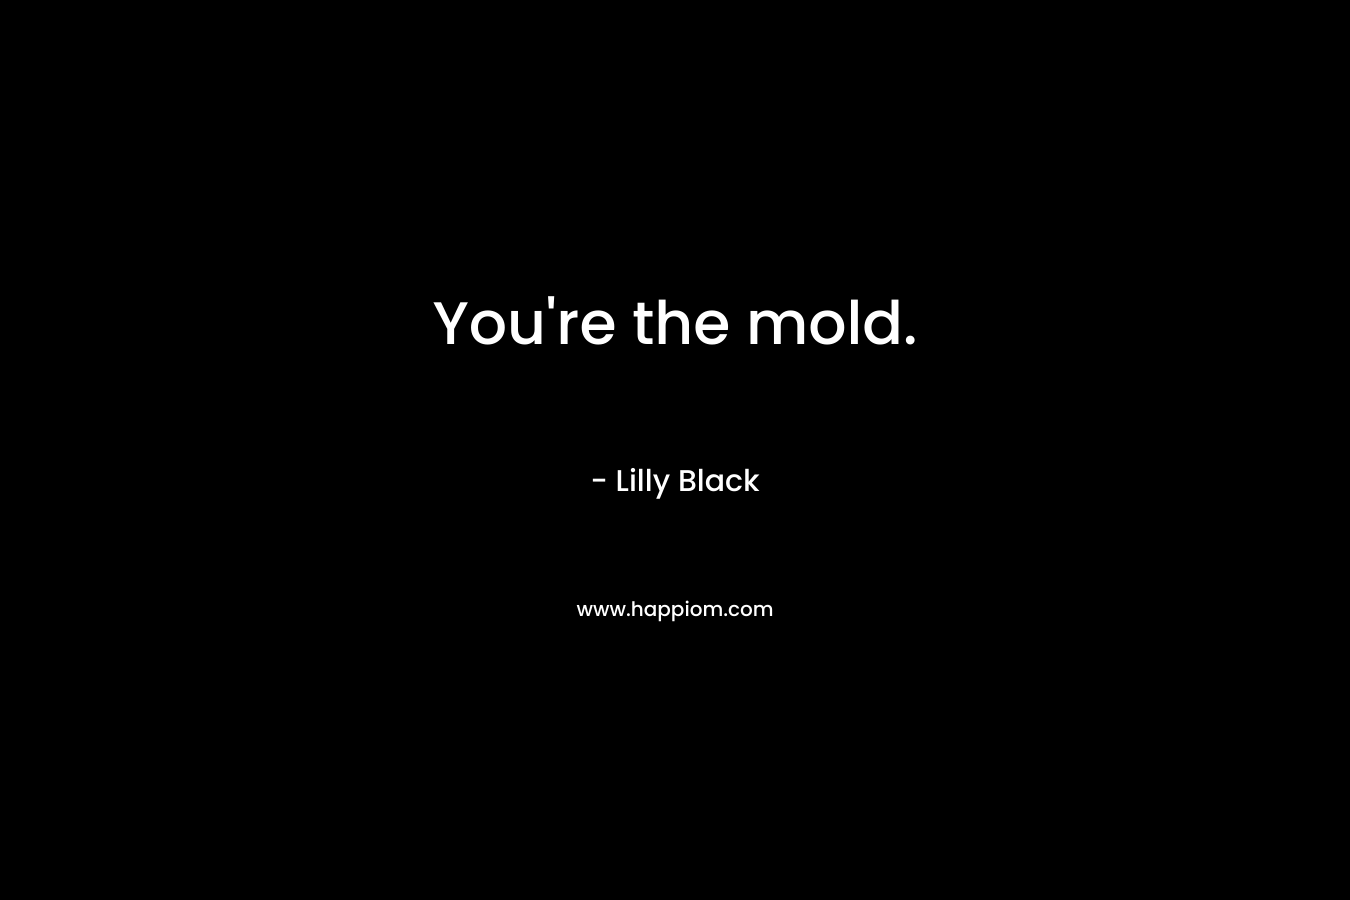 You’re the mold. – Lilly Black